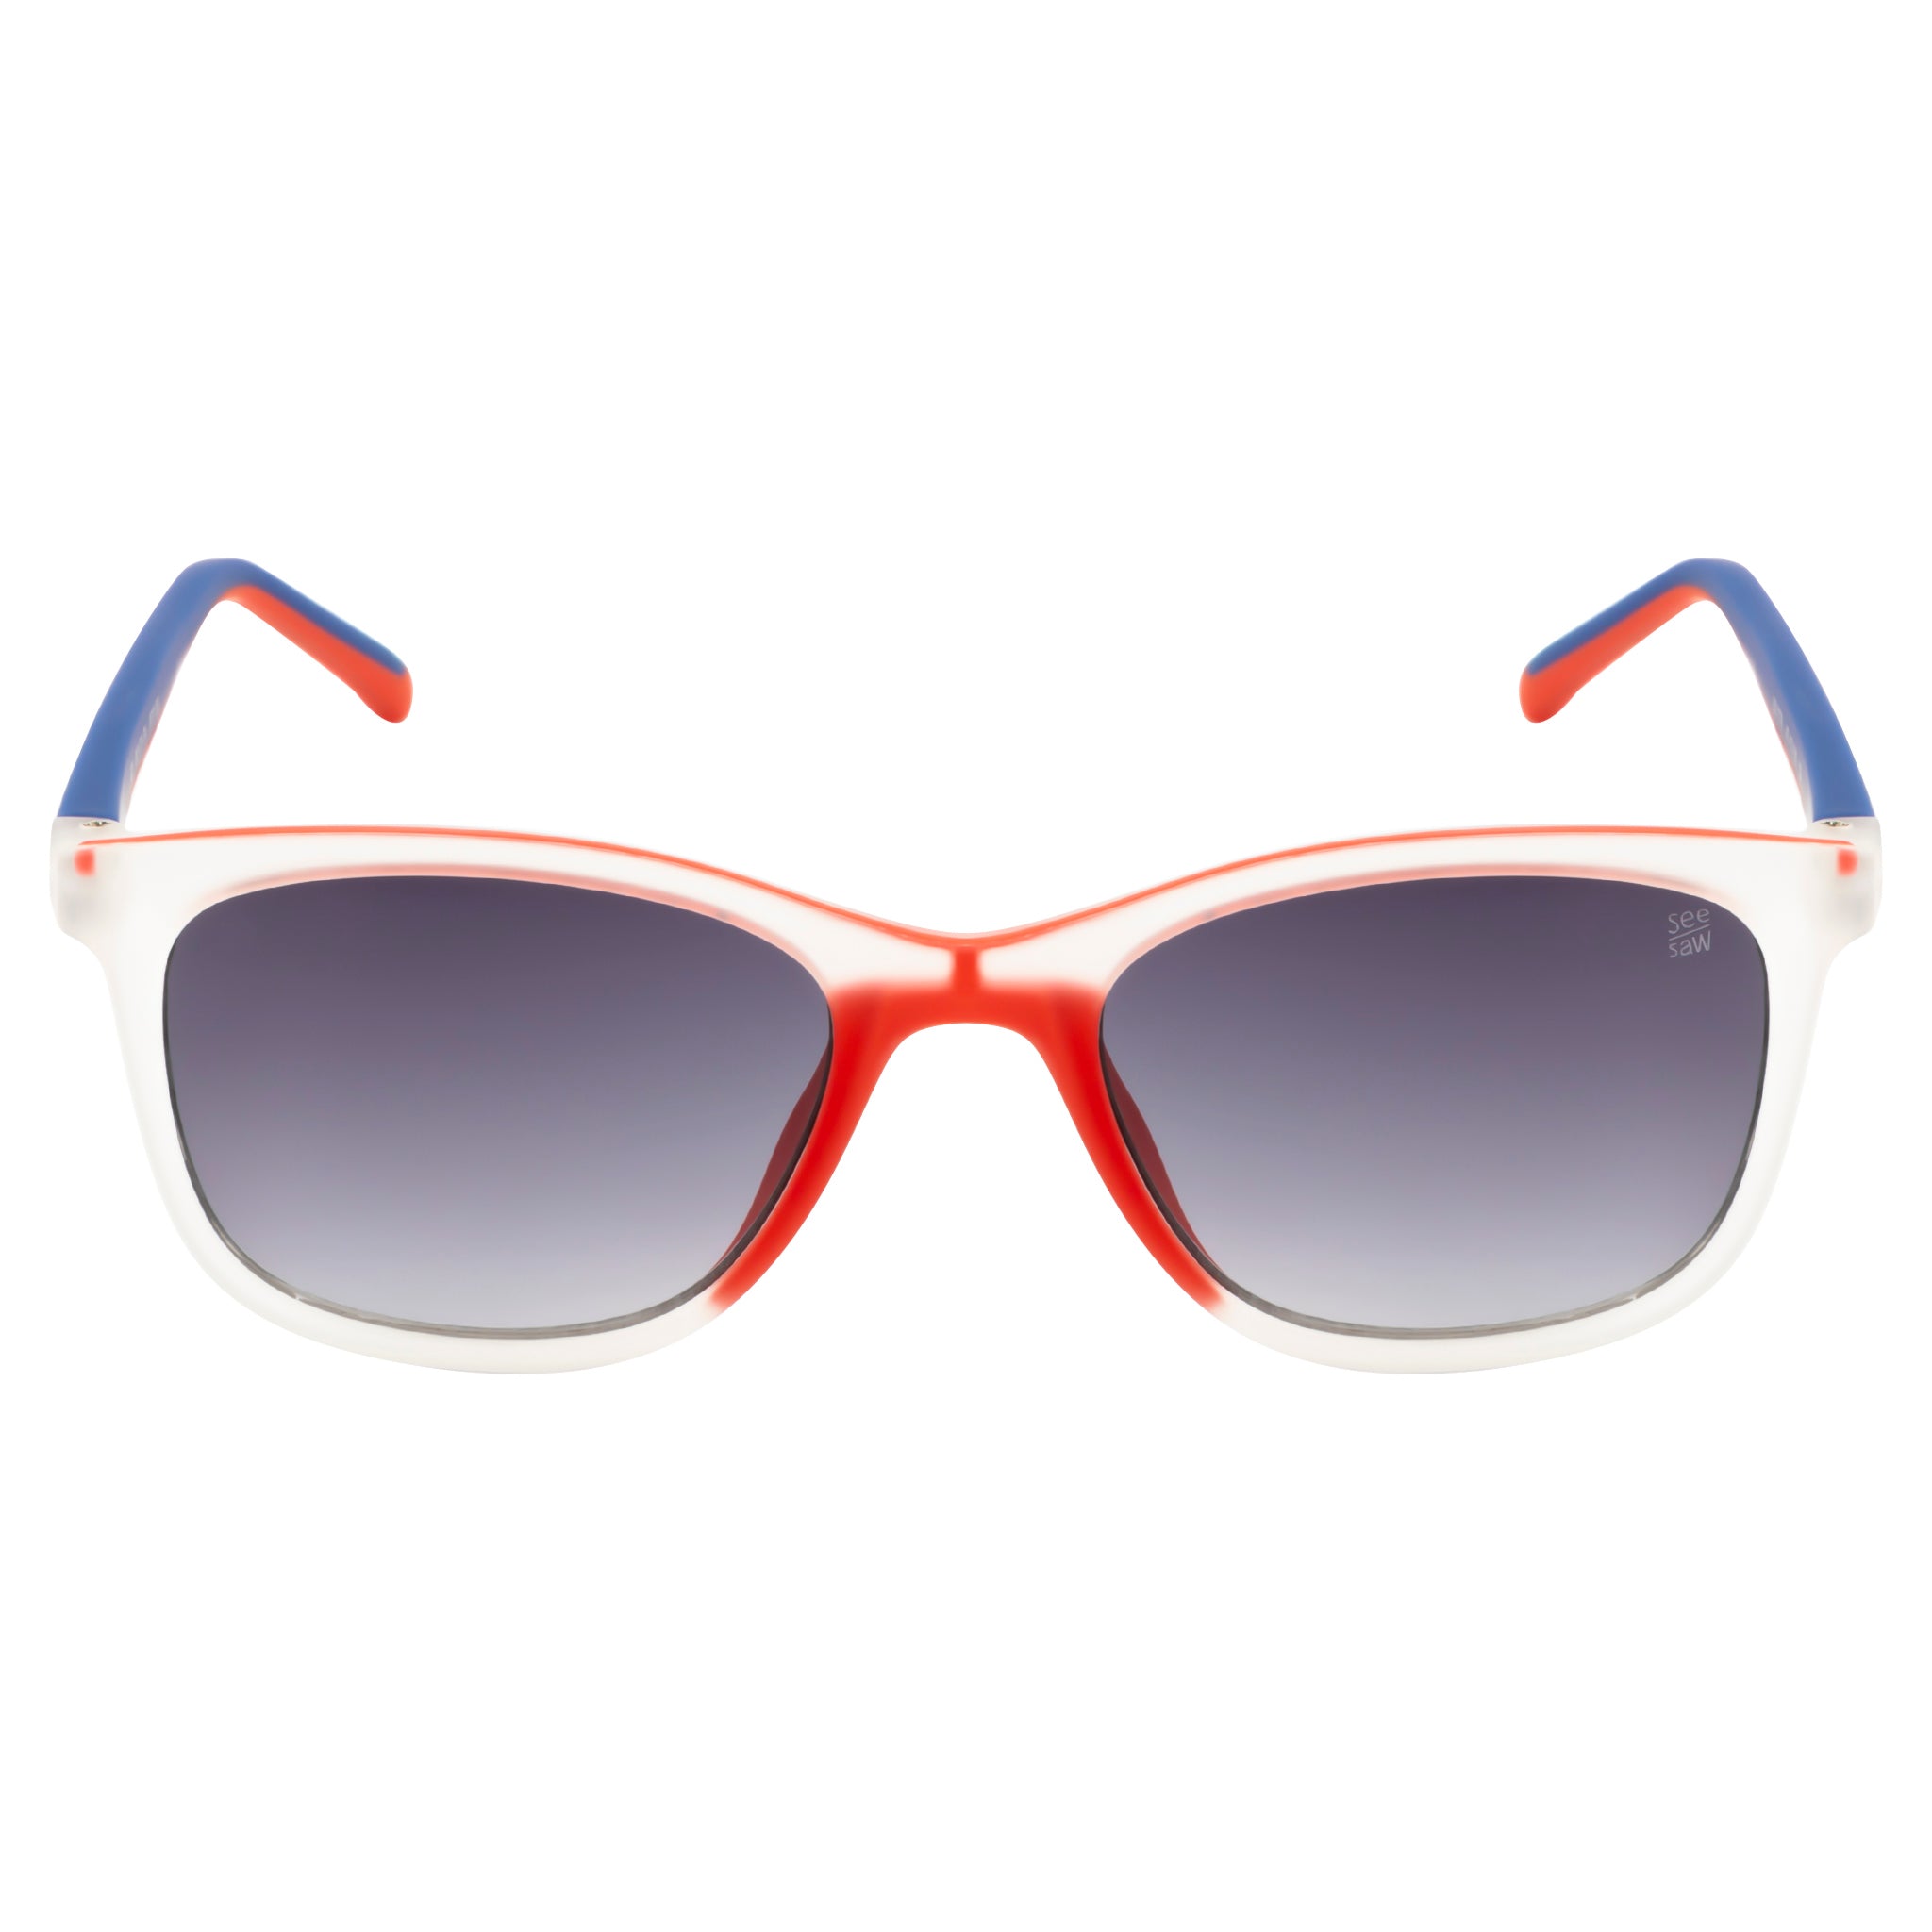 See Saw SS1178 47 Rectangle Acetate